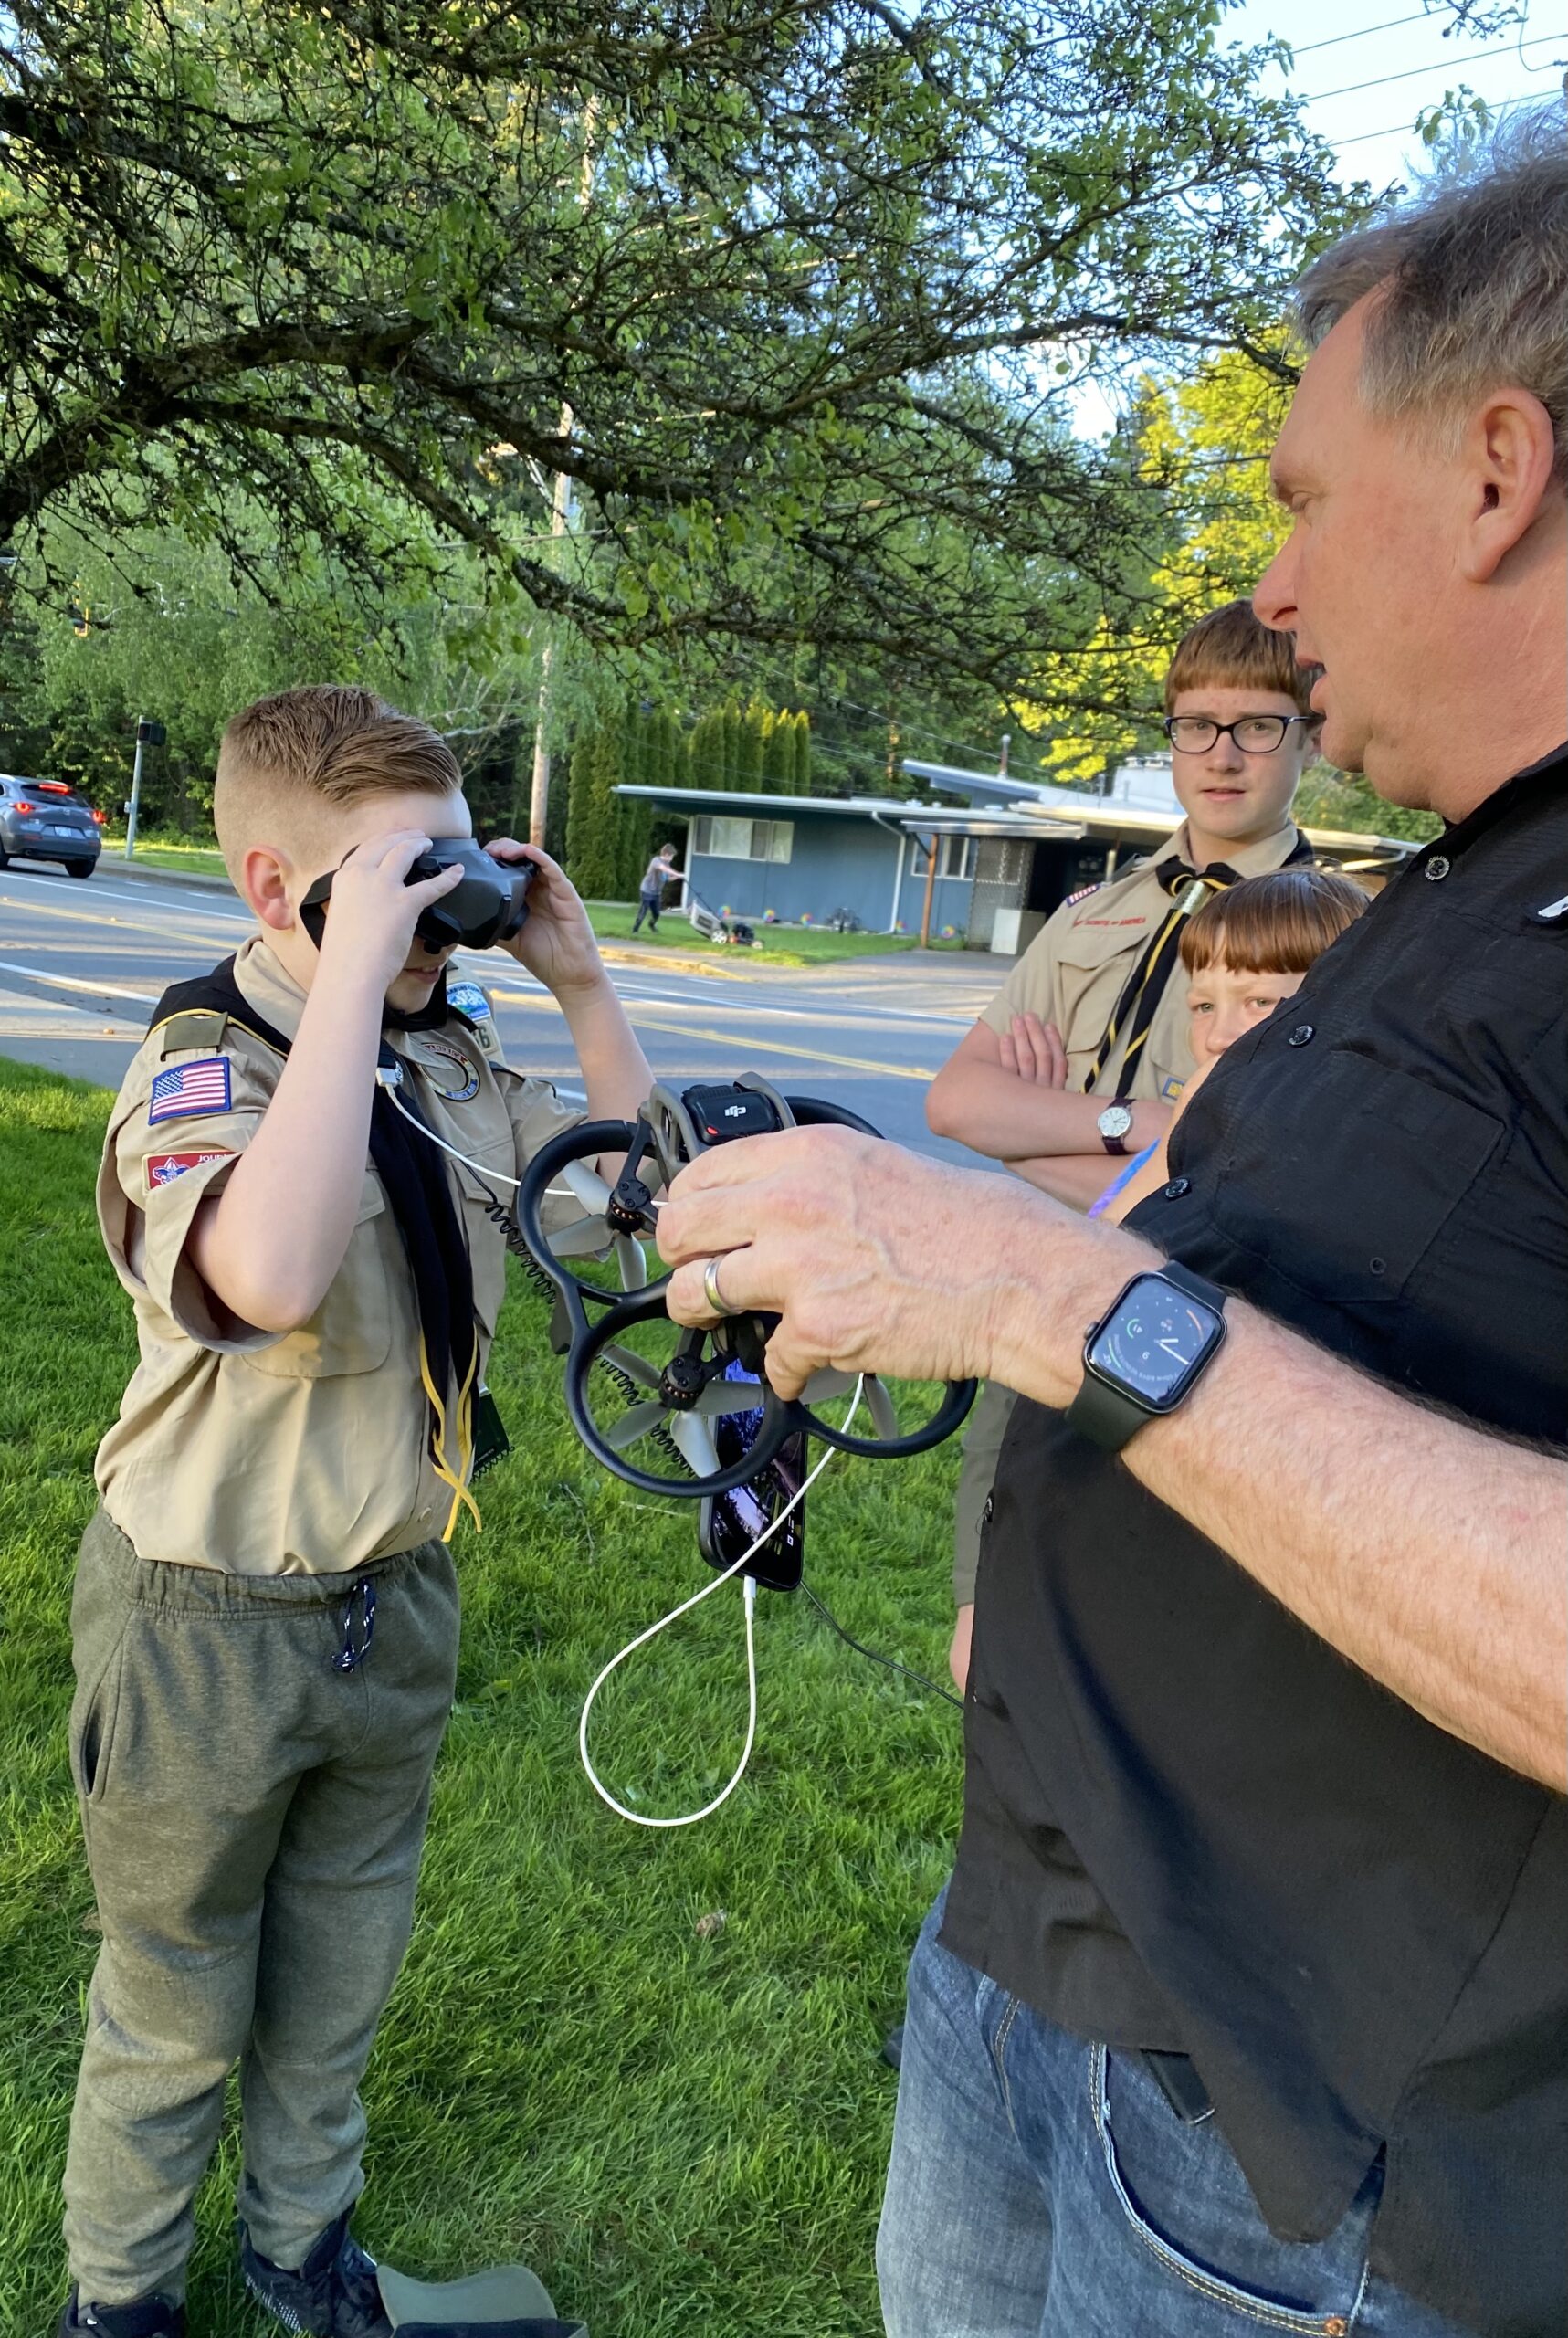 Scout looking through FPV goggles.